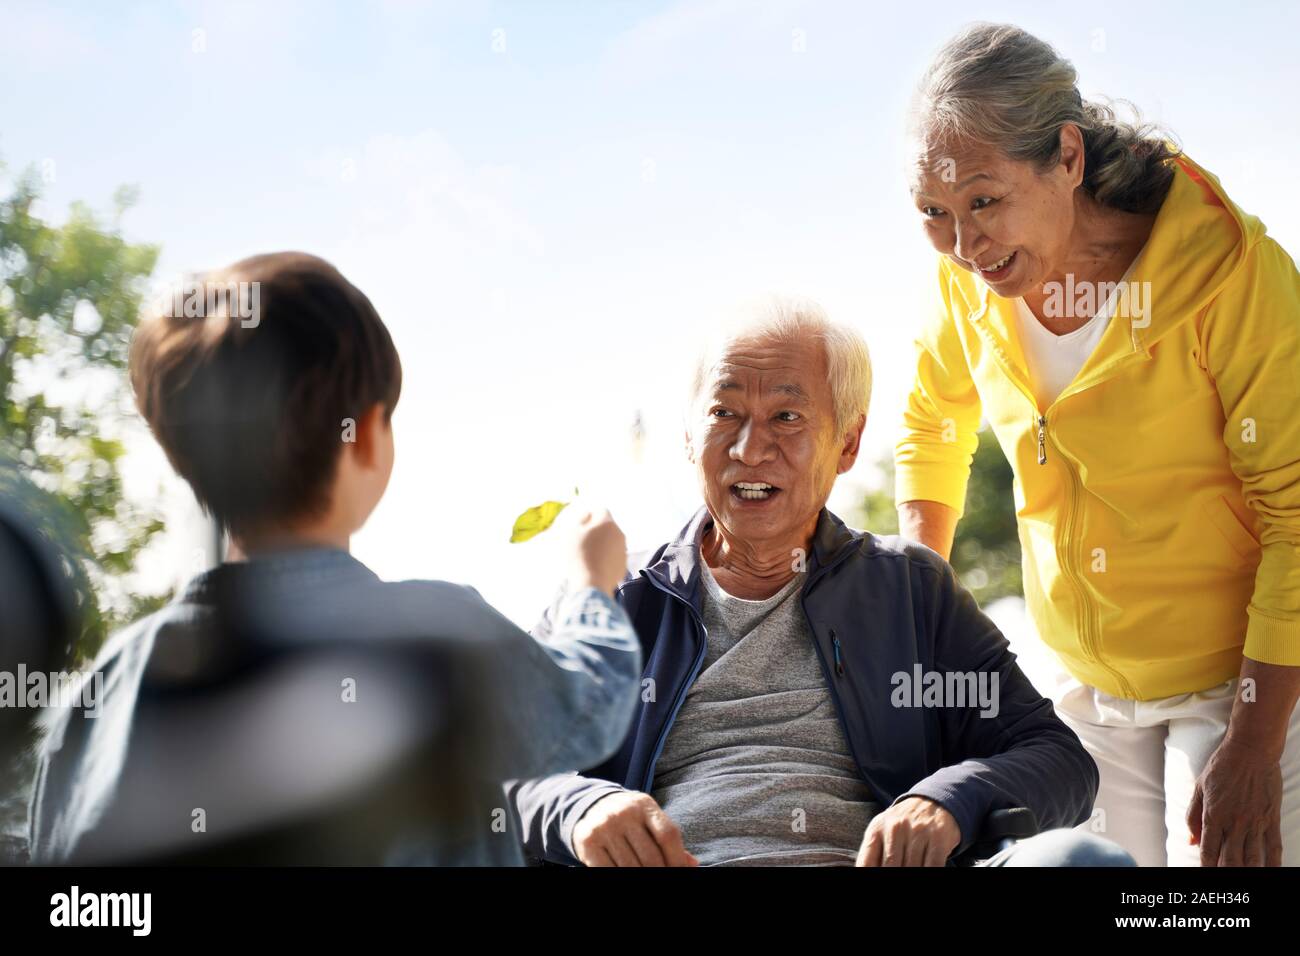 asian grandfather grandmother and grandson having fun outdoors in park Stock Photo